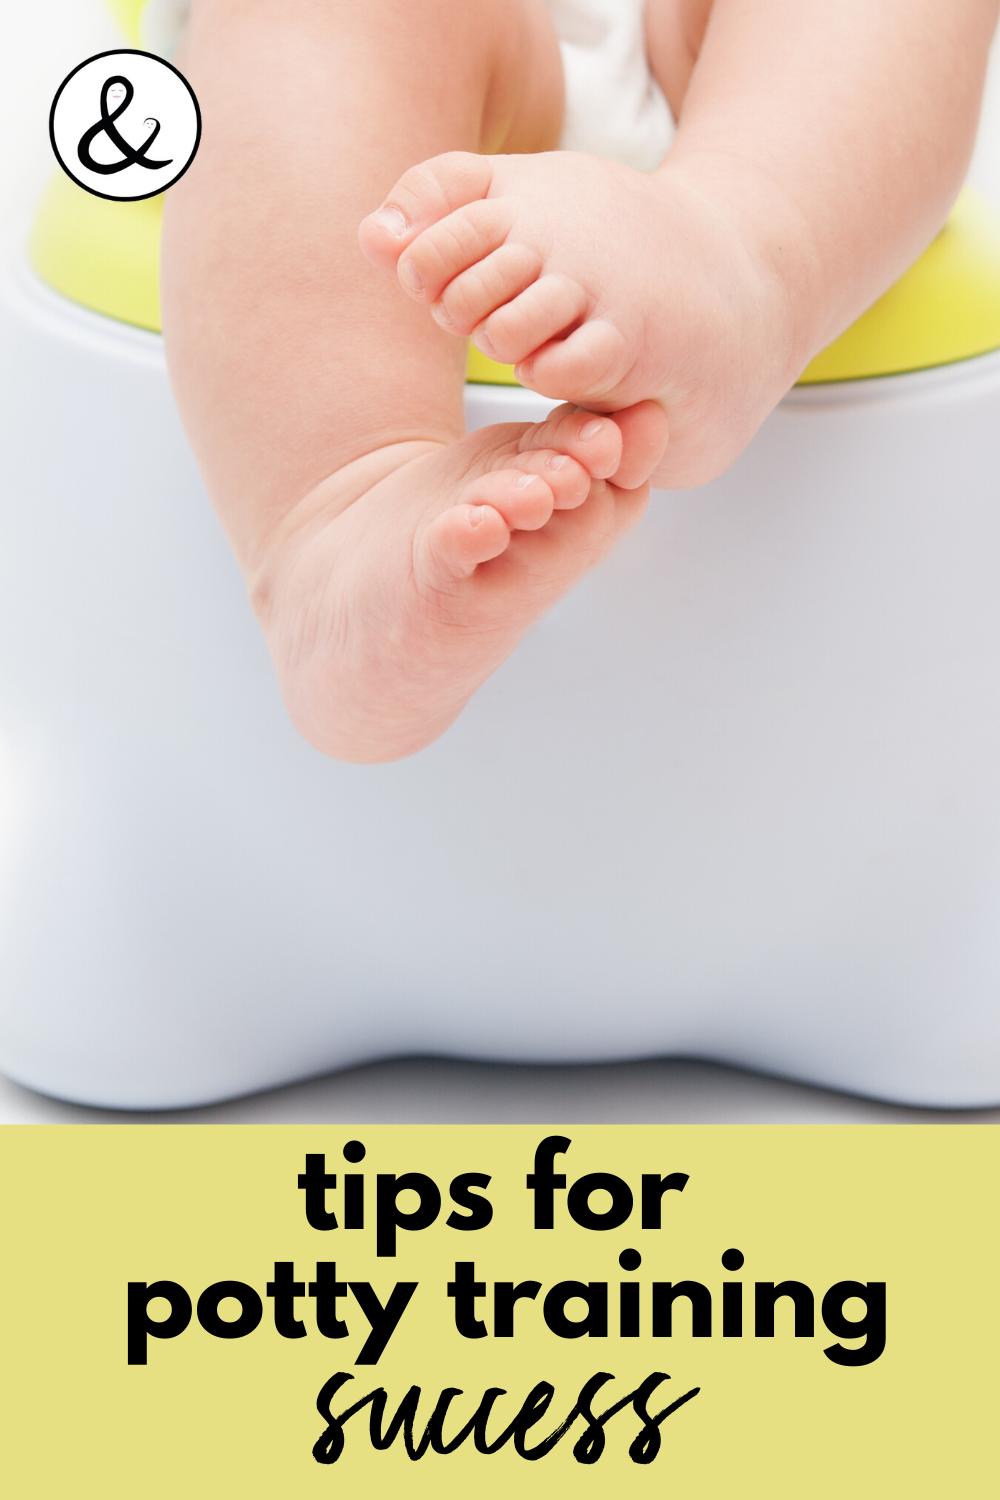 Tips for Potty Training Success